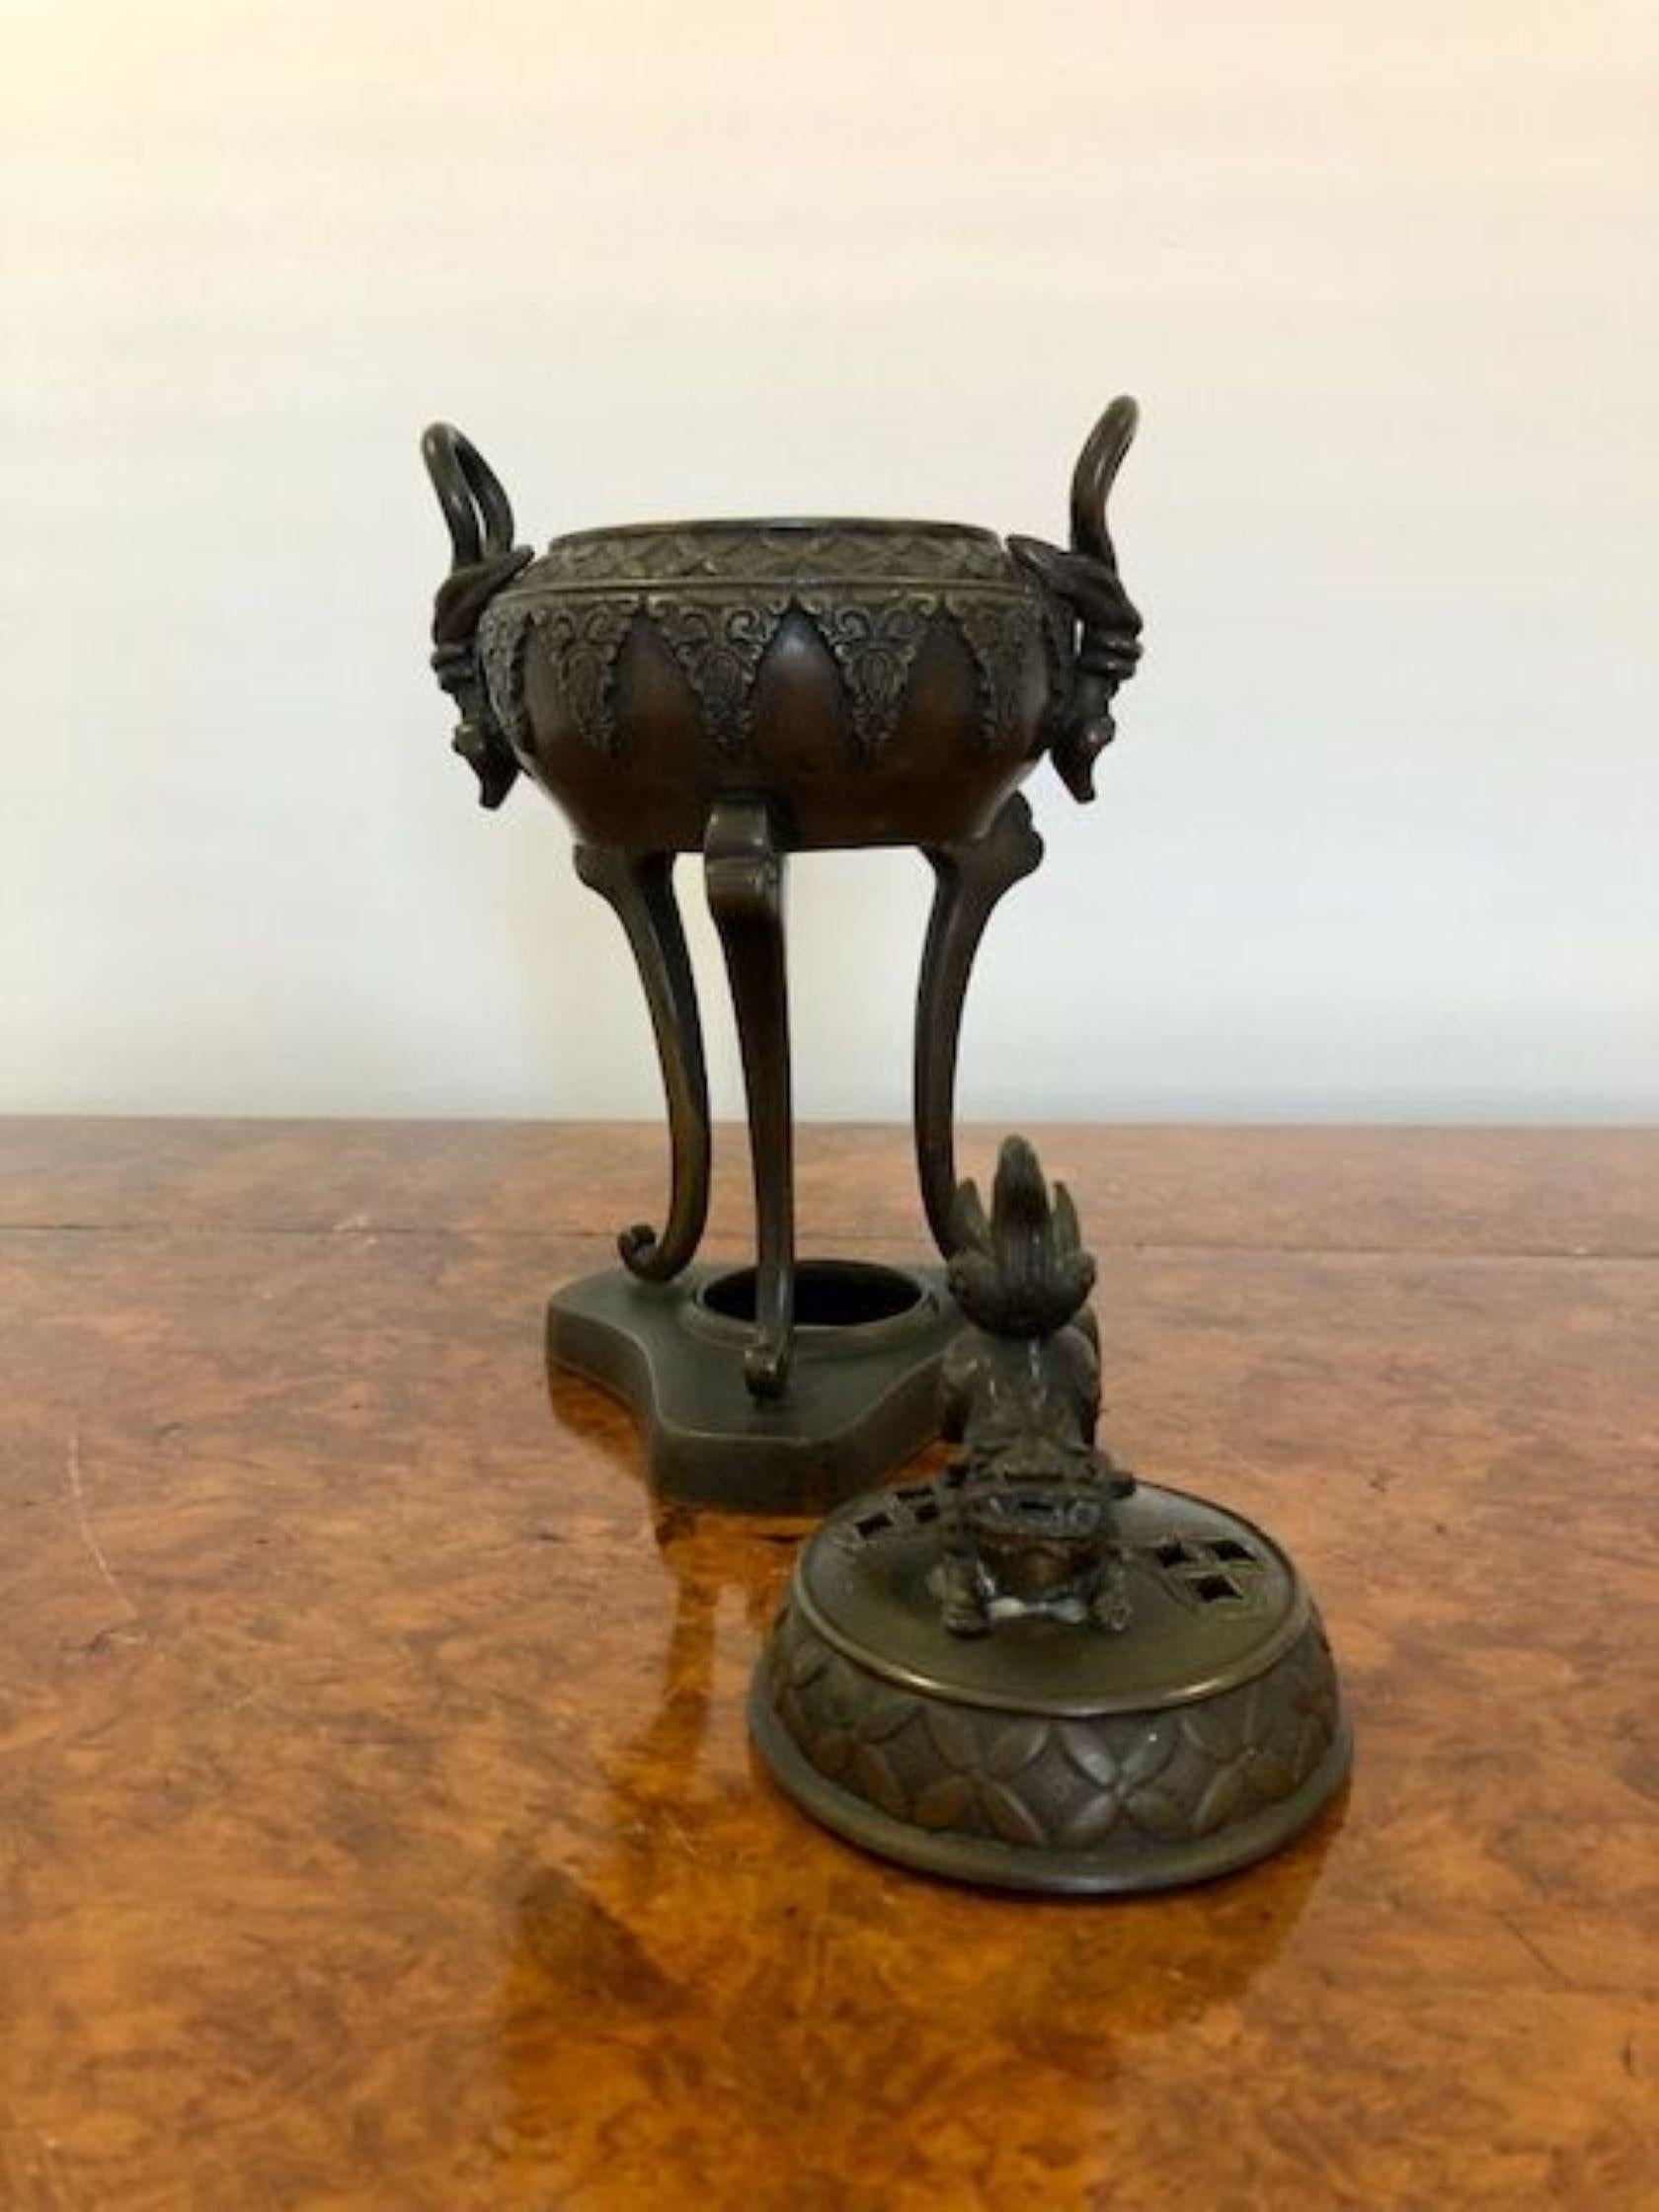 Quality antique Chinese bronze incense vase. Having a lift of ornate lid with a dog above a ornate vase with quality handles raised on three legs and a platform shaped base. 